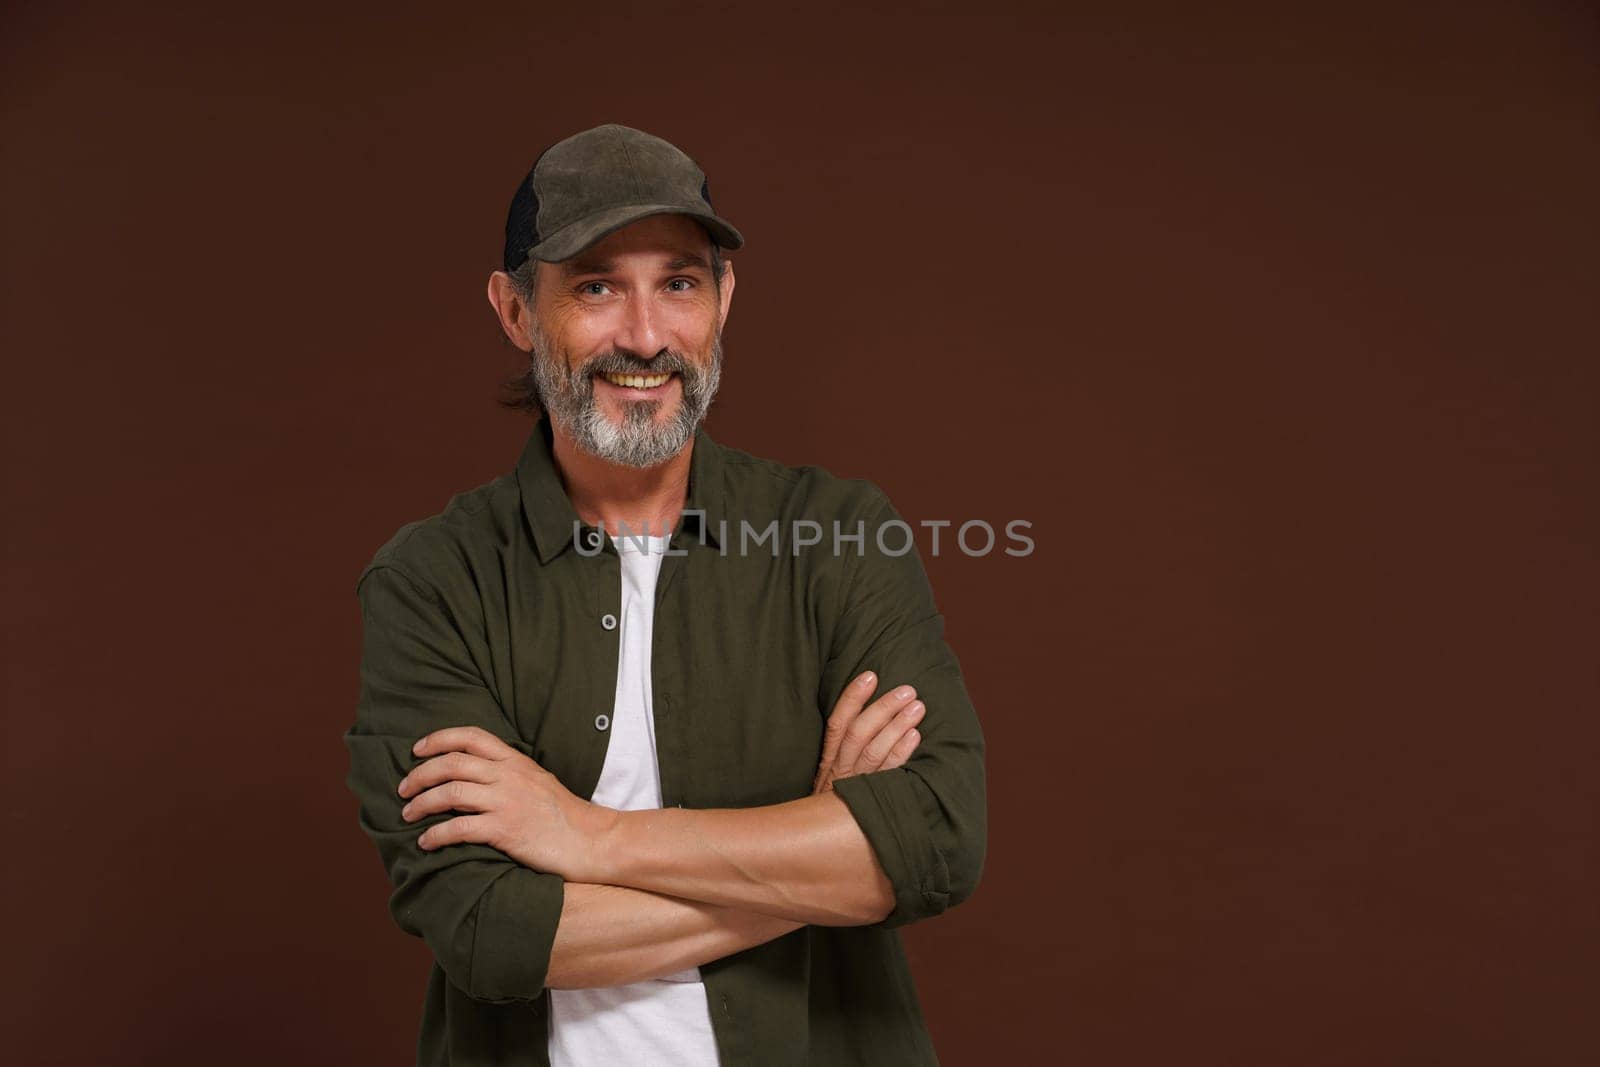 Happy Smiling man. A fisherman in a baseball cap and green shirt stands cross-legged against a brown background with copy space. High quality photo